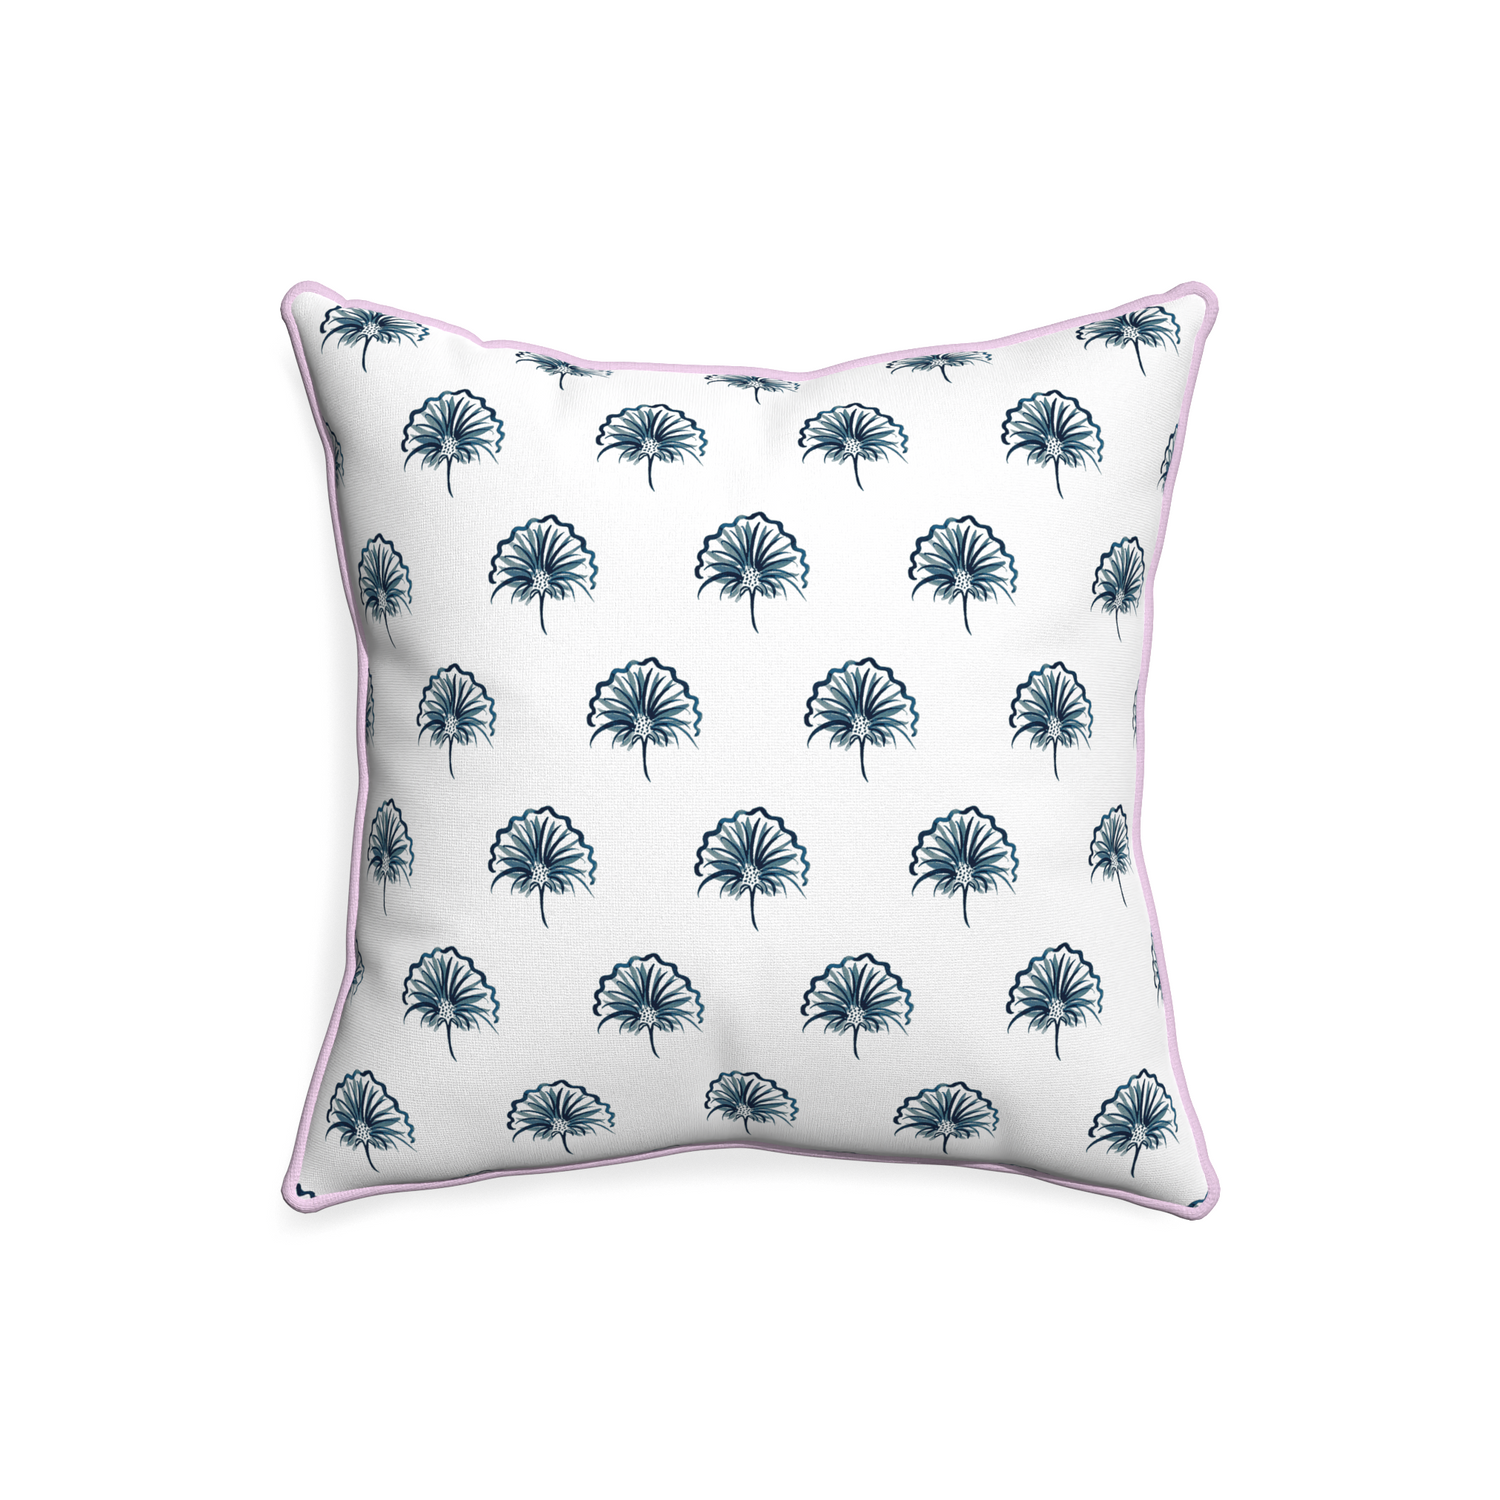 20-square penelope midnight custom pillow with l piping on white background